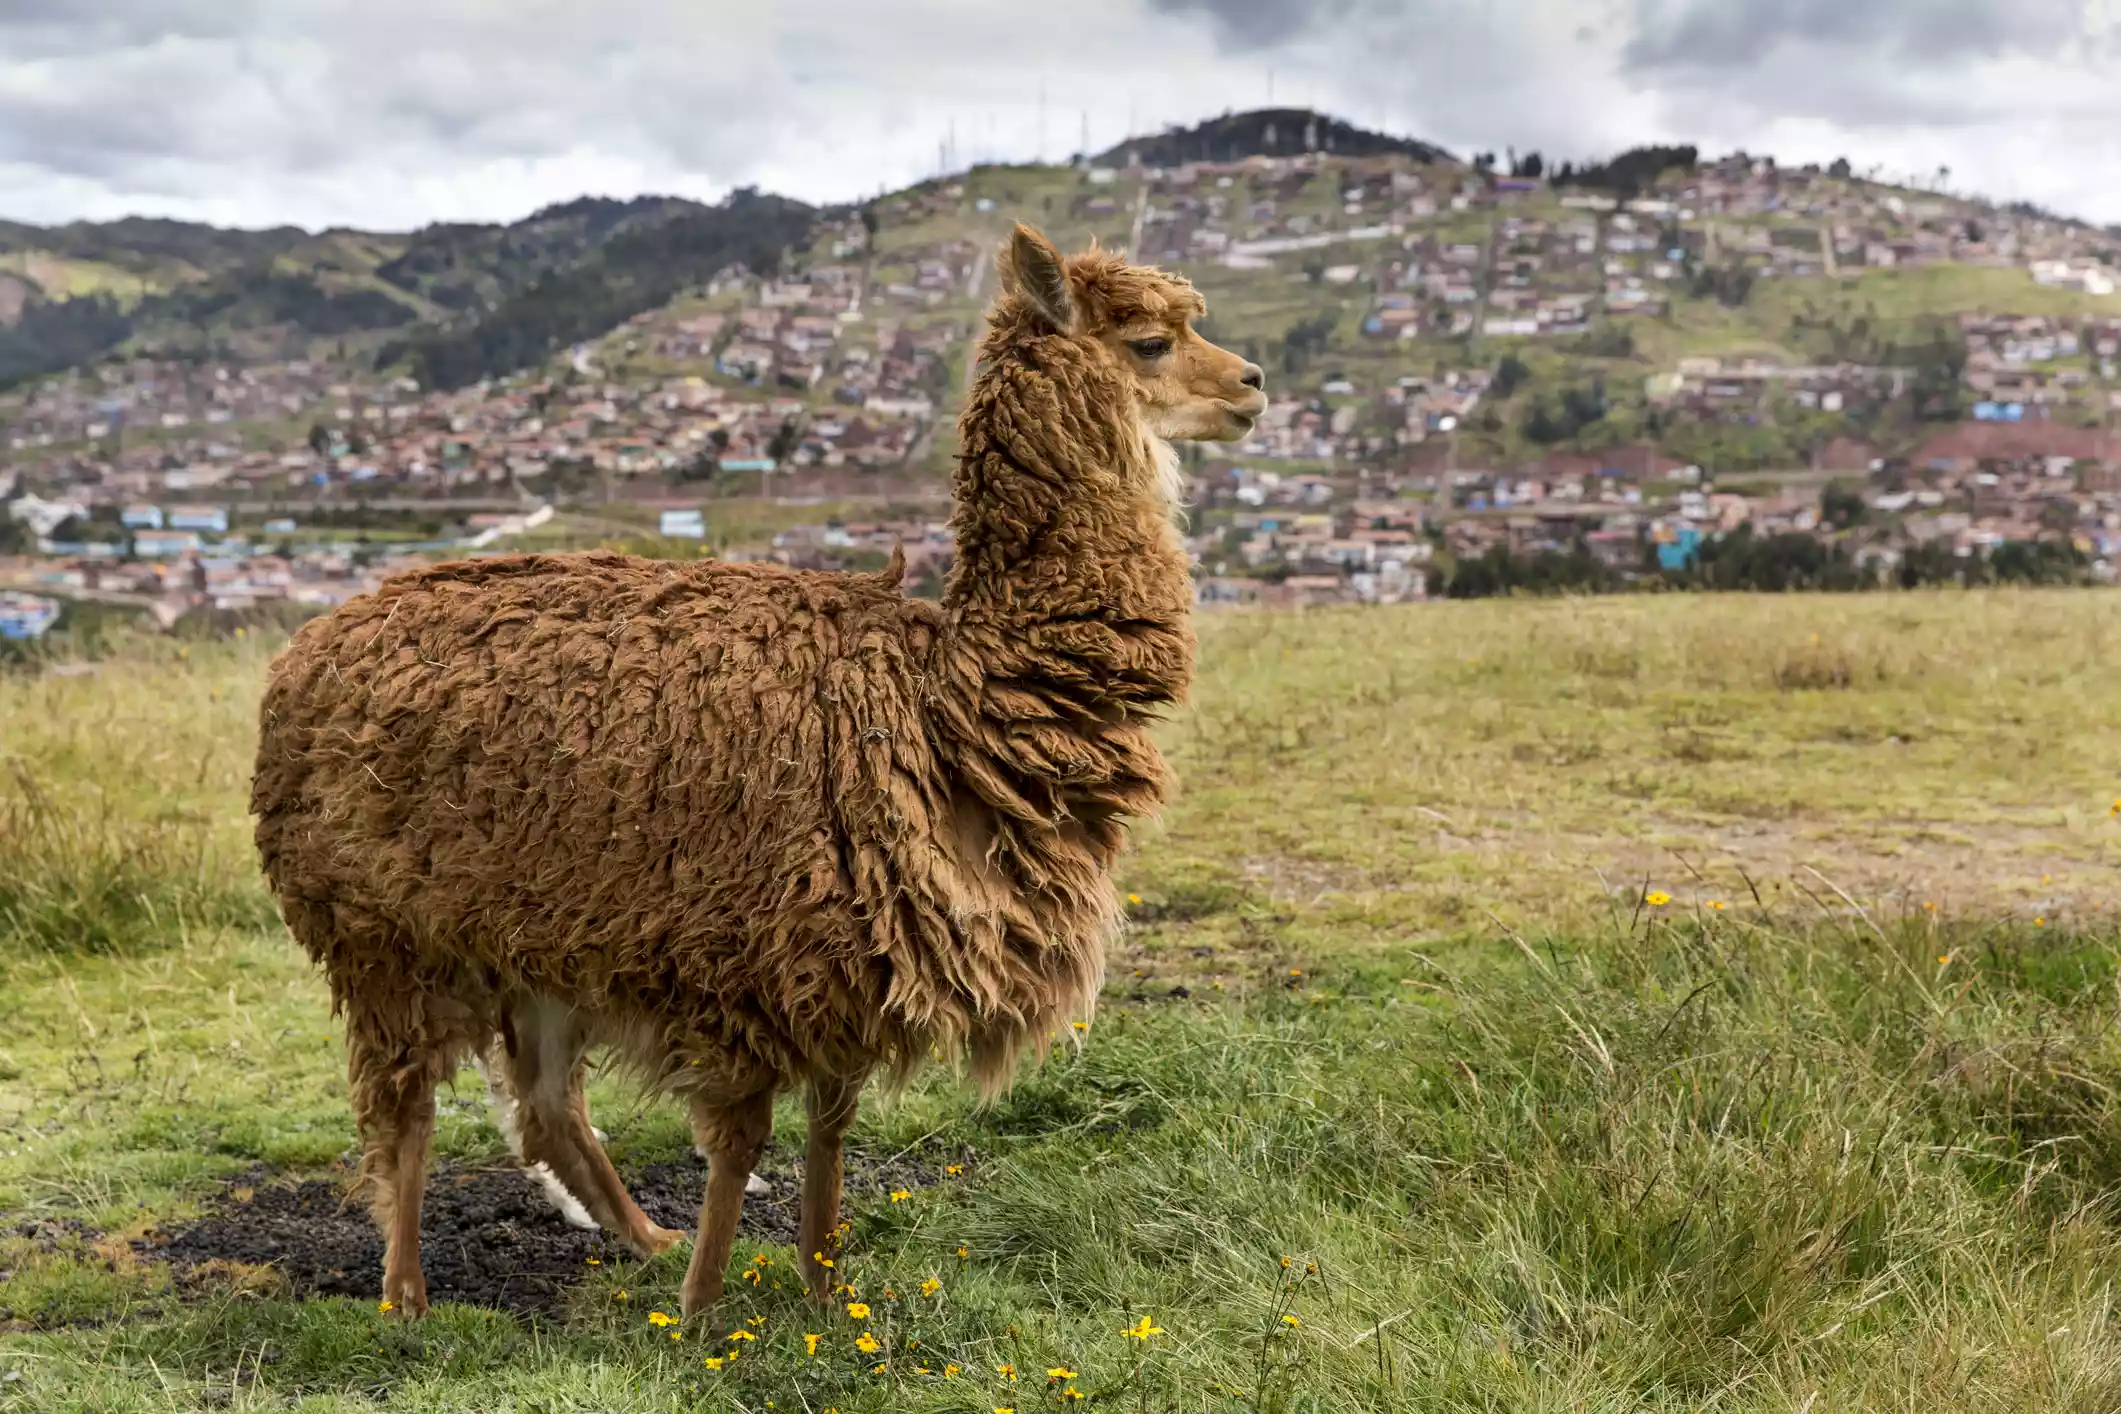 A brown alpaca standing in a grassy field with a hill covered in buildings in the background